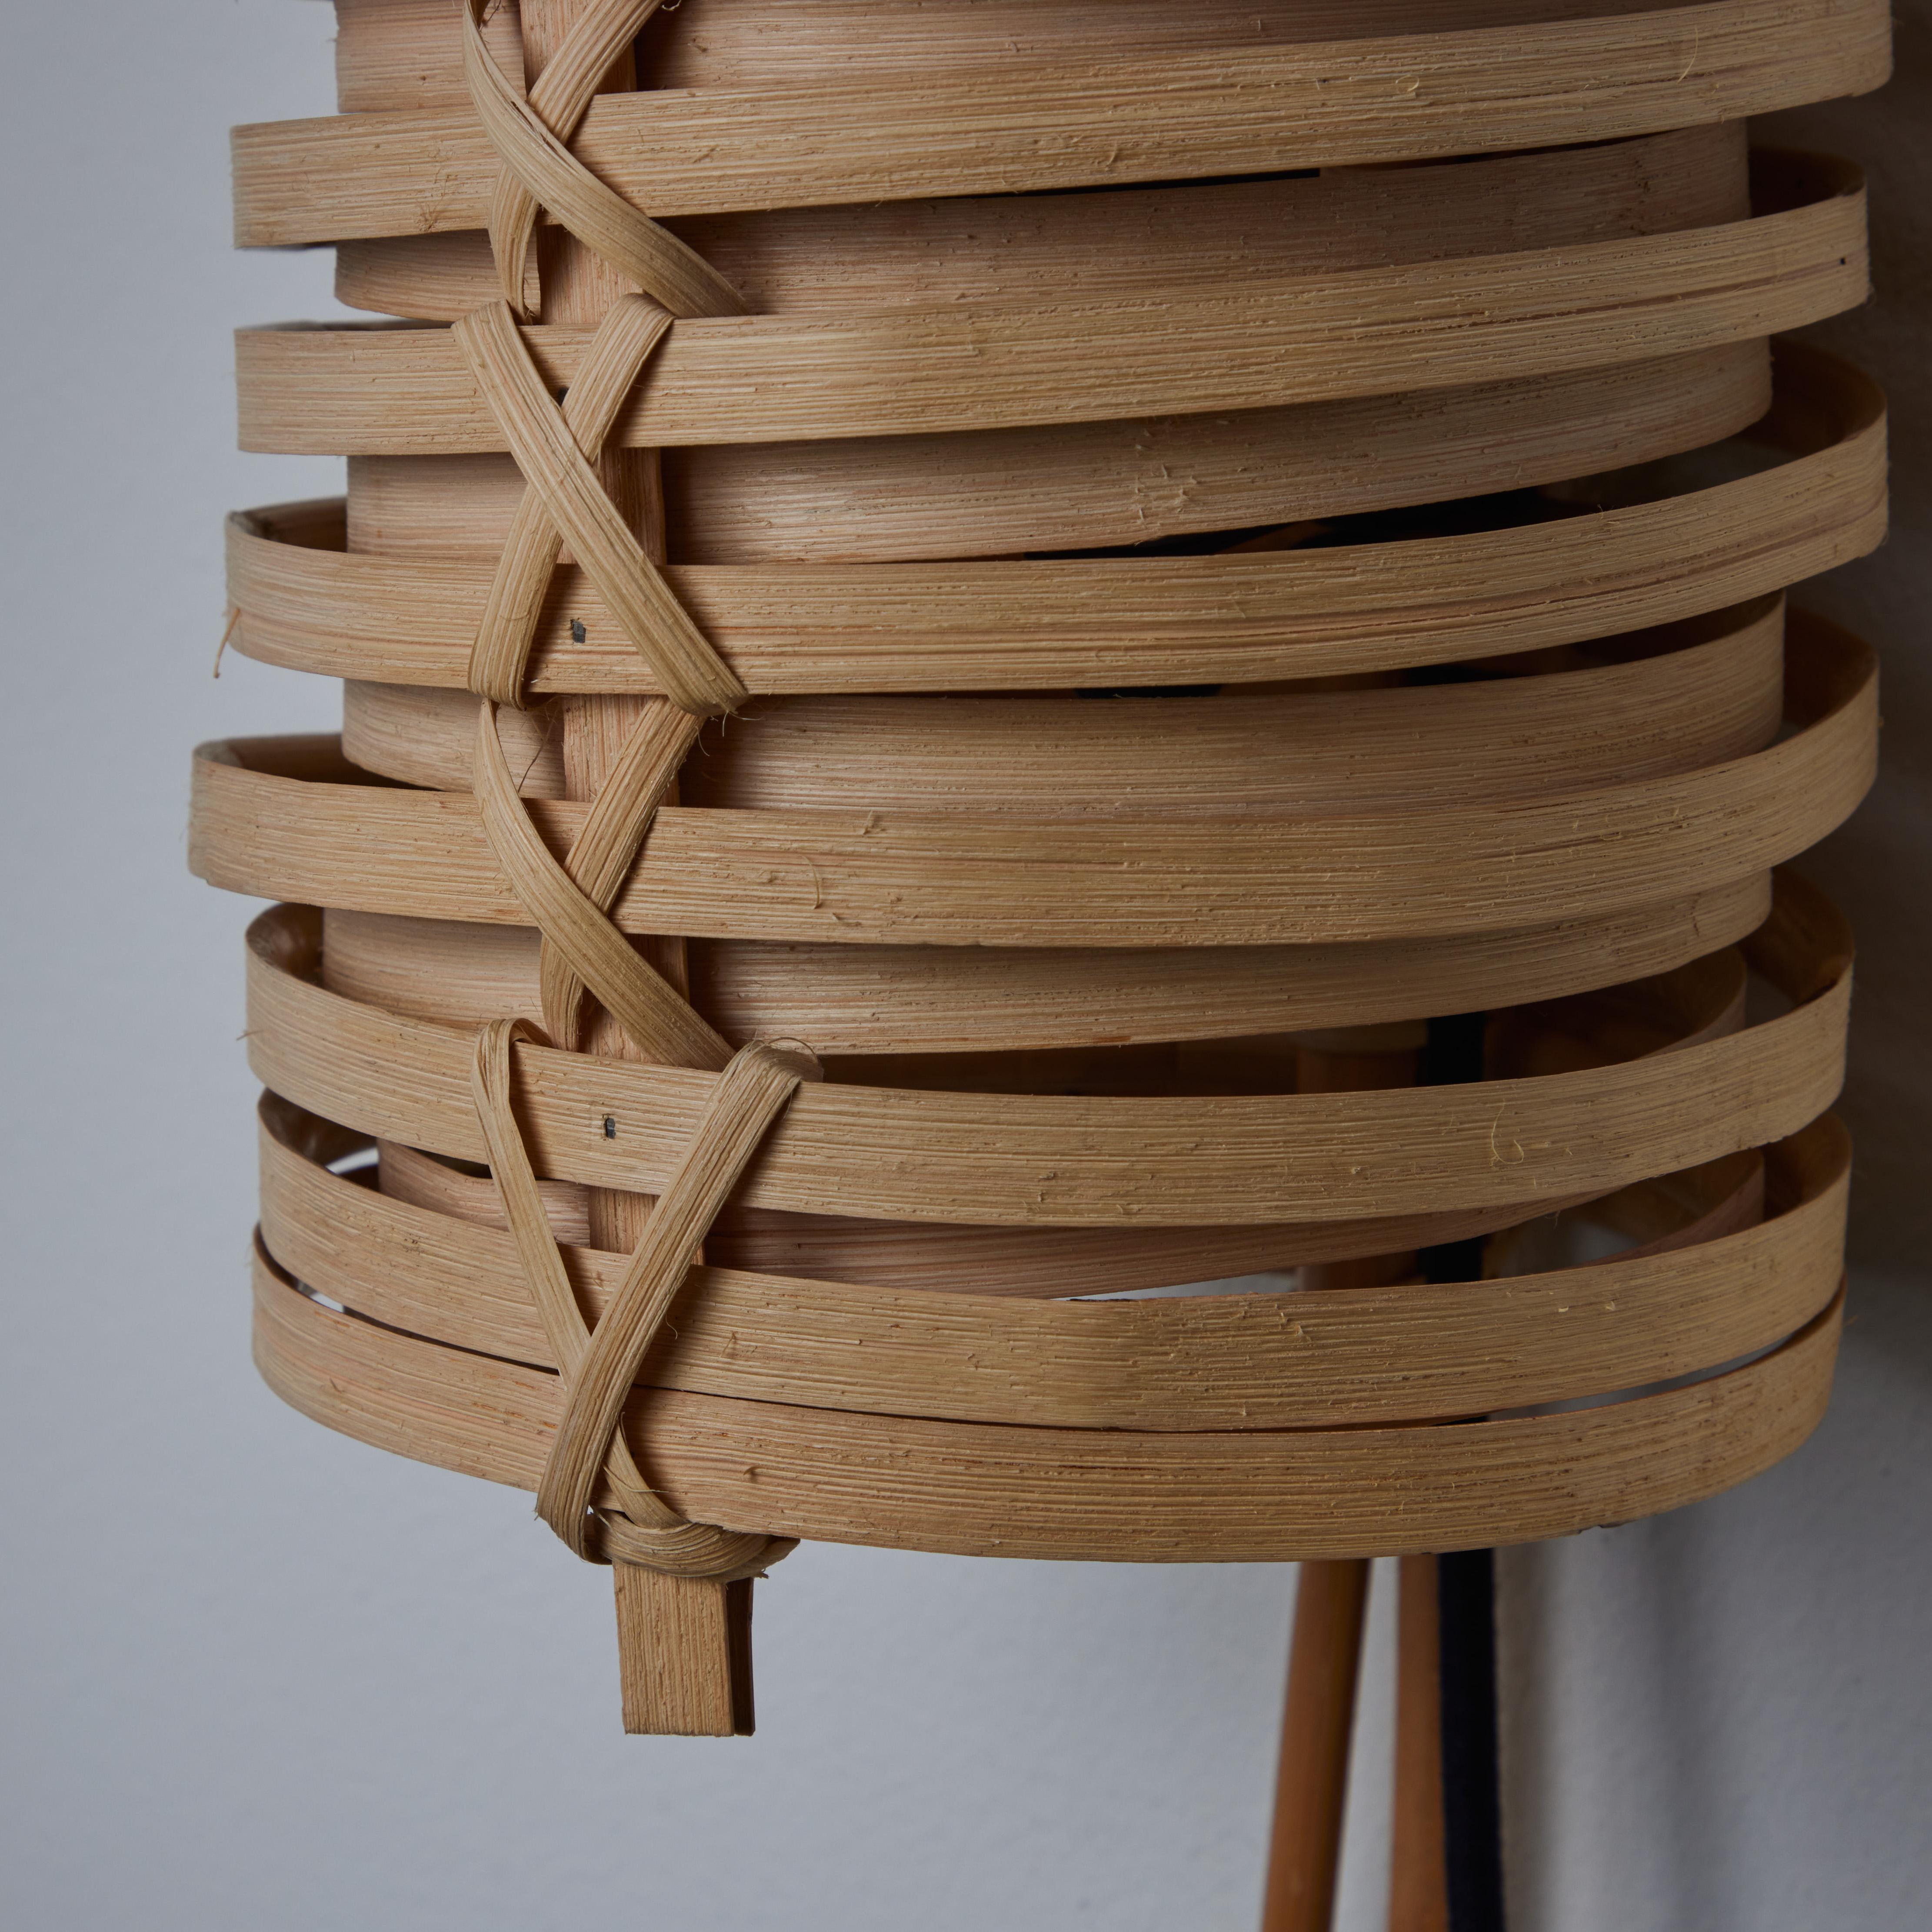 J.A. Coderch 'Junco' Rattan Cane Wall Lamp for Tunds For Sale 10